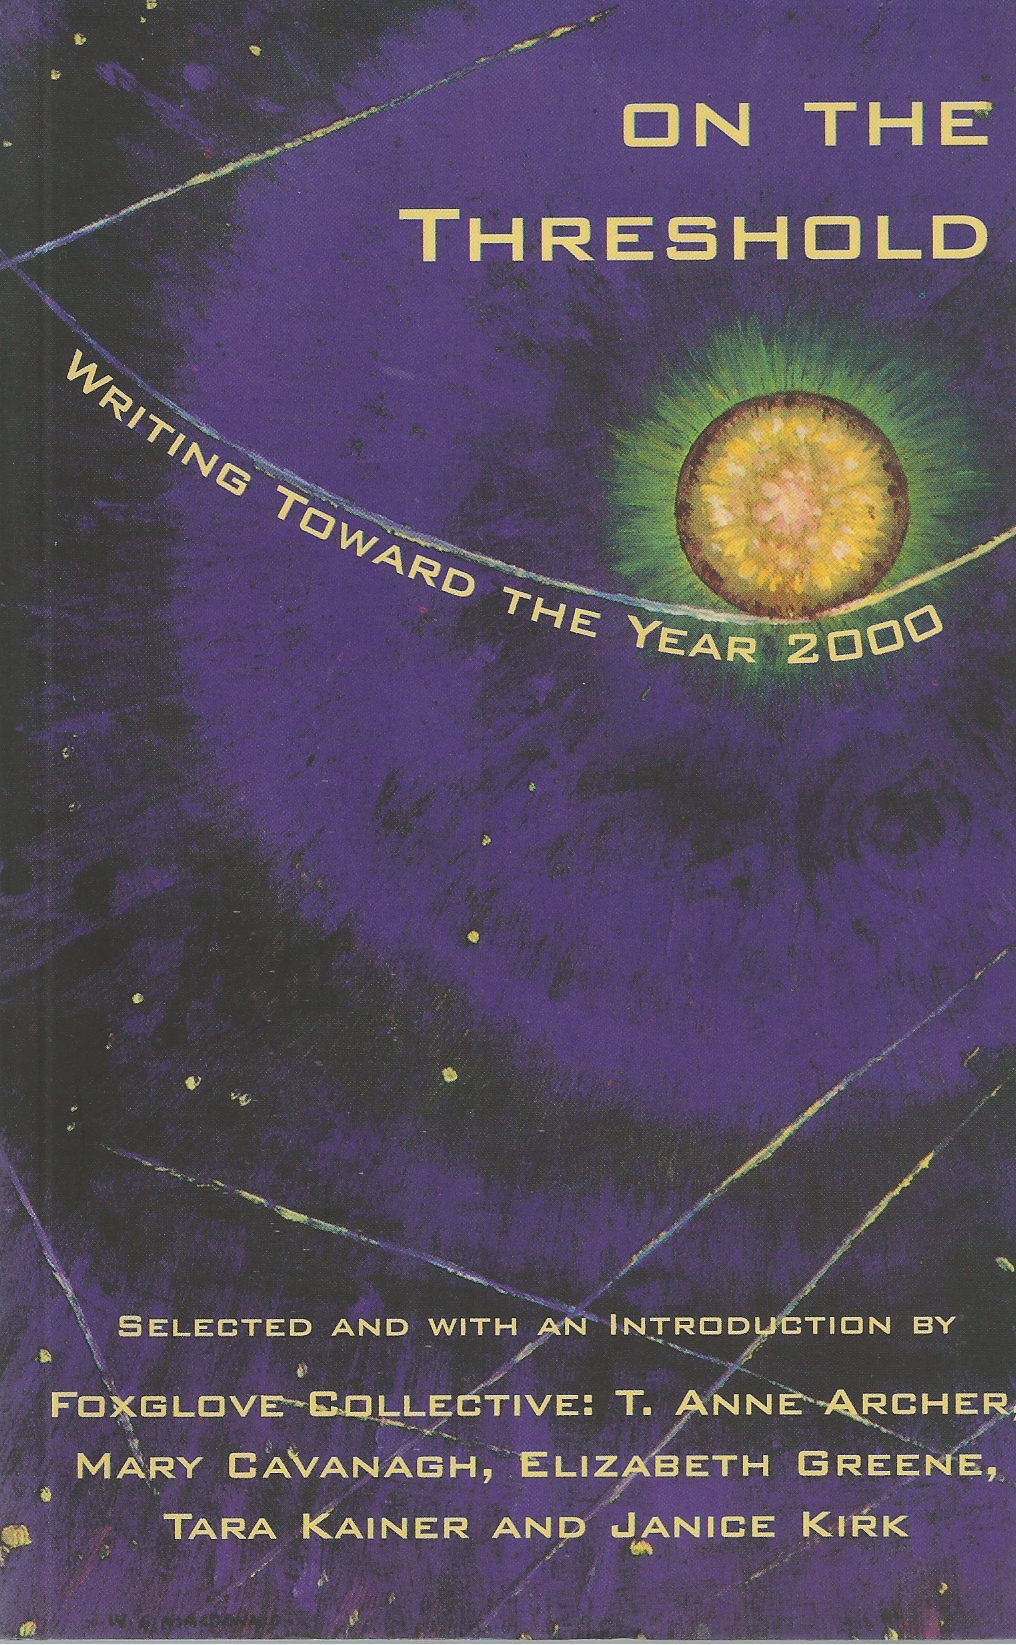 FOXGLOVE, COLLECTIVE - On the Threshold Writing Toward the Year 2000